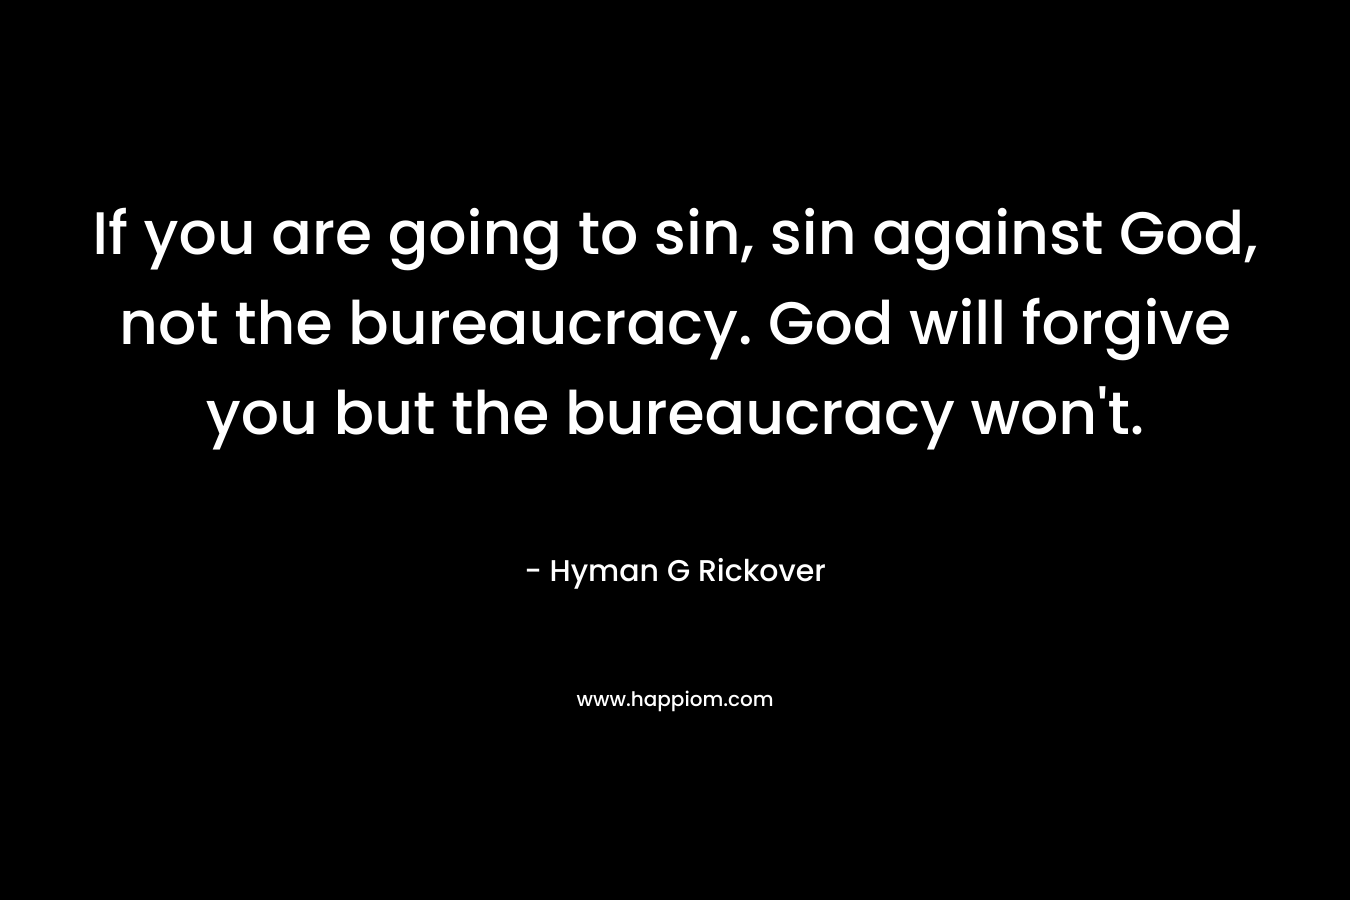 If you are going to sin, sin against God, not the bureaucracy. God will forgive you but the bureaucracy won't.